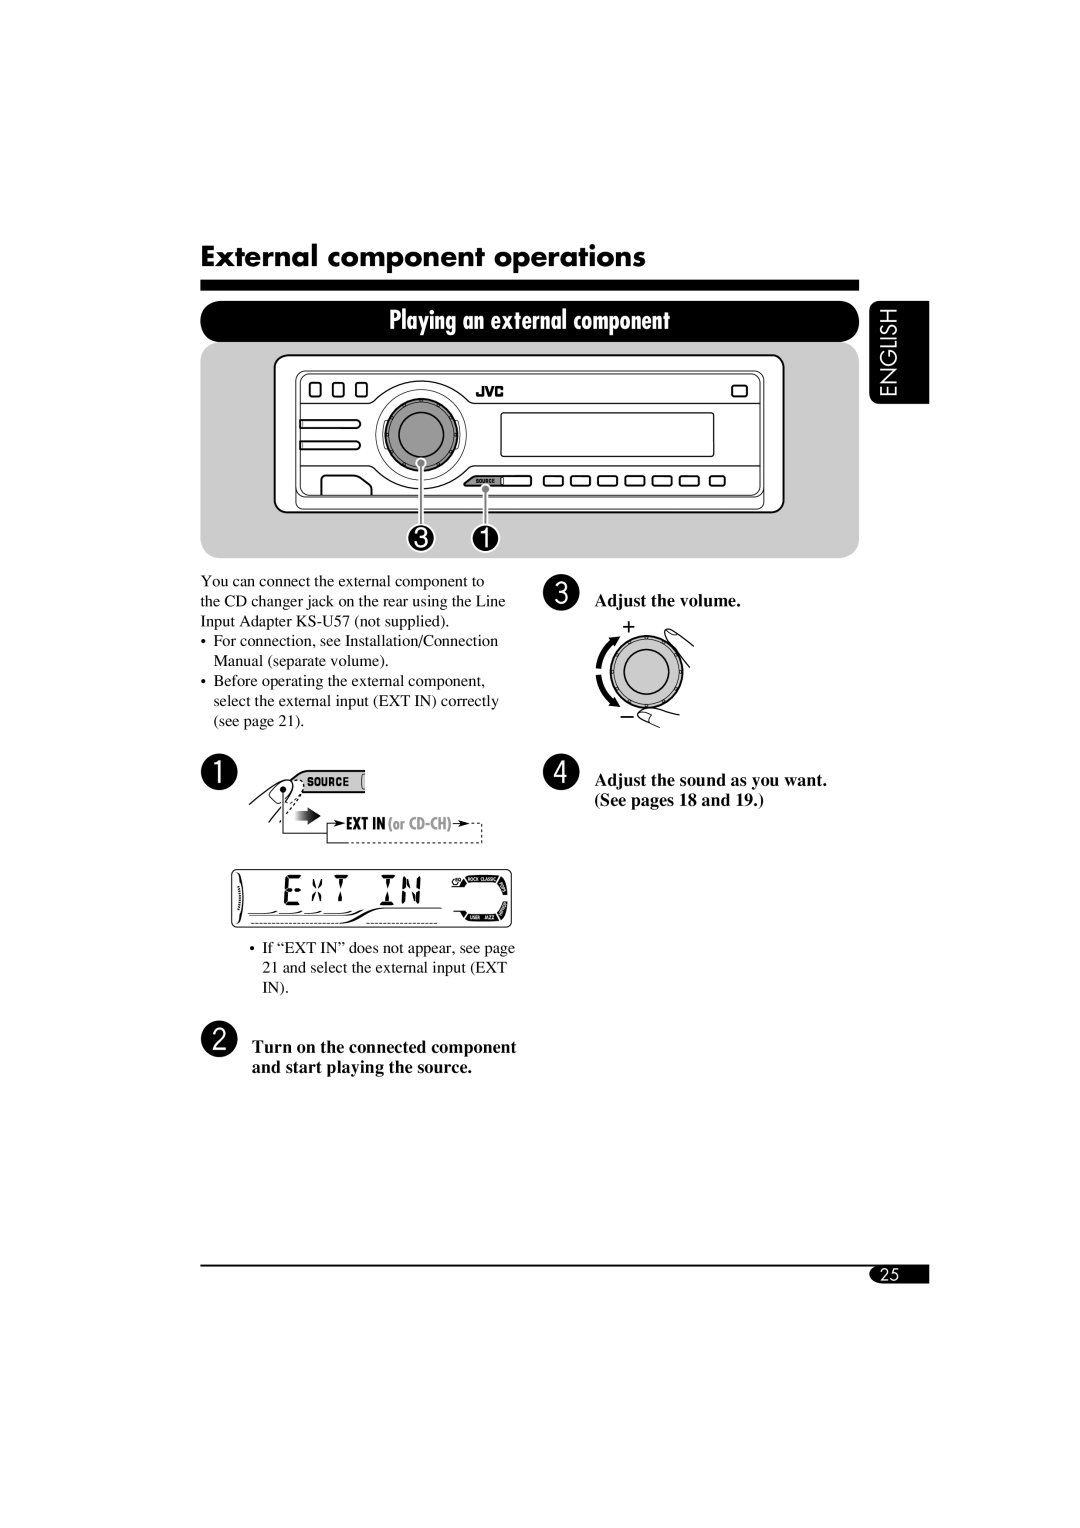 JVC KD-S51 External component operations, Playing an external component, English, Adjust the volume, See pages 18 and 